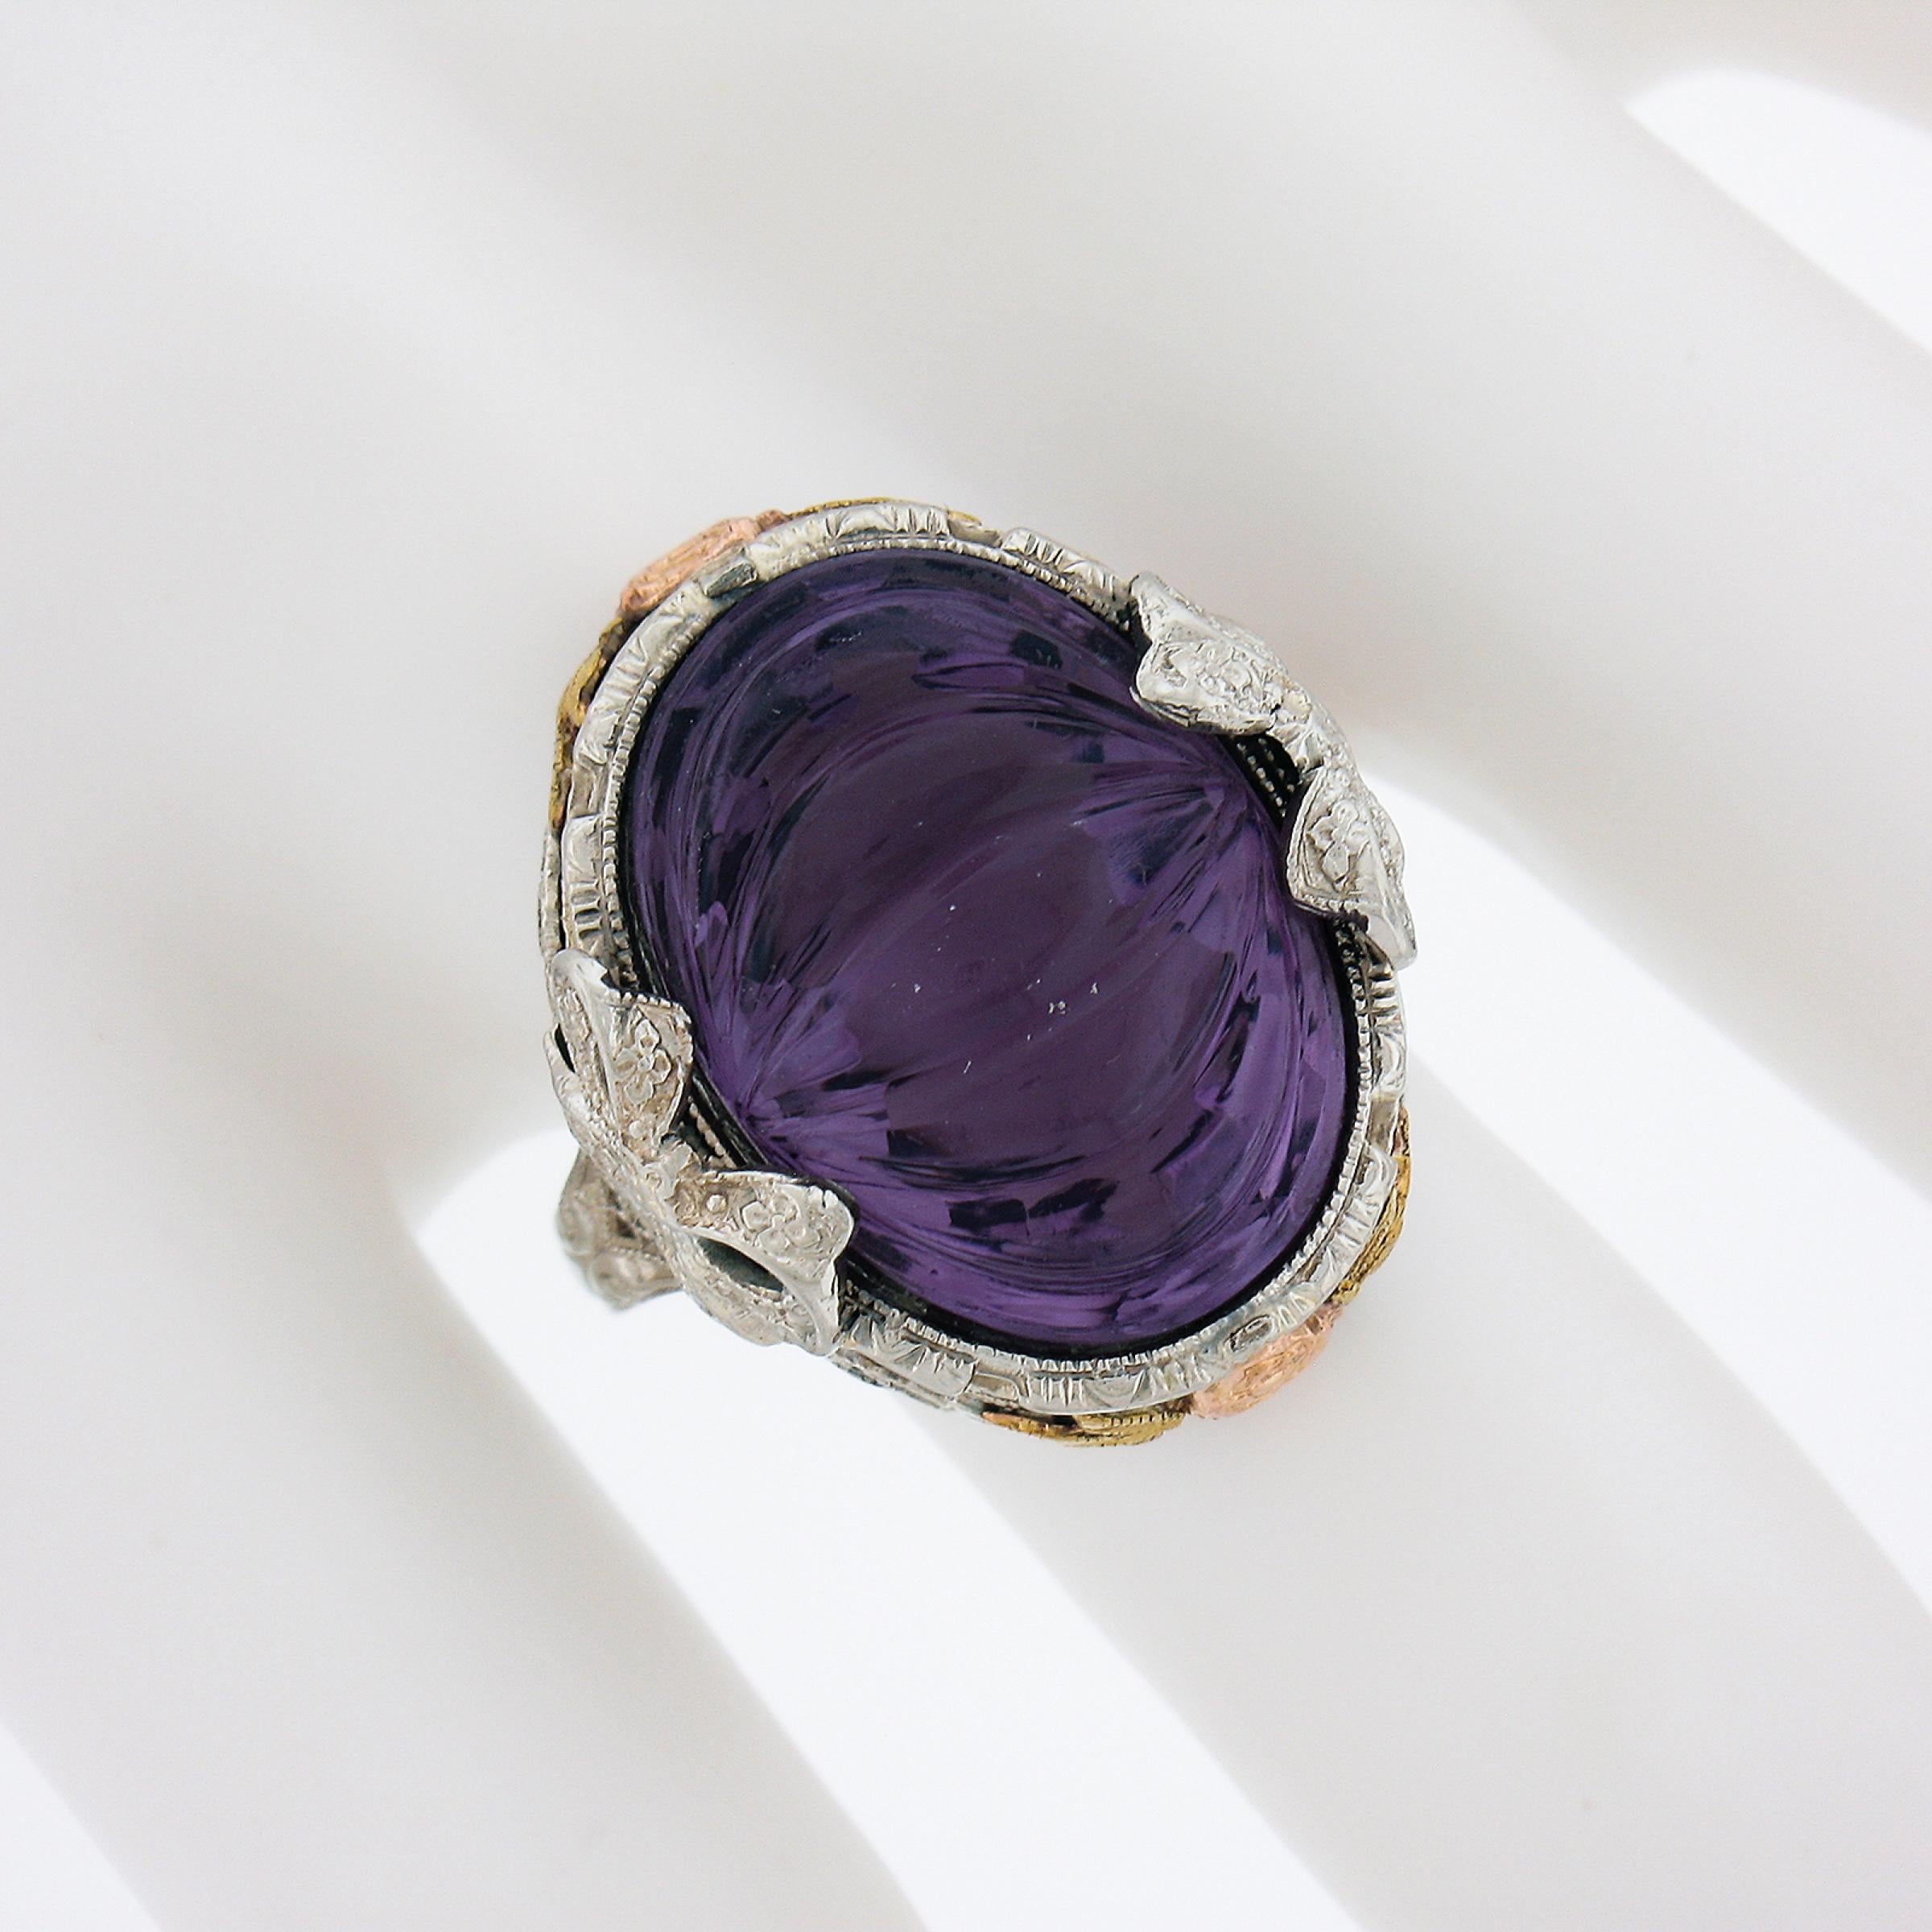 Antique Art Deco 14k Gold Oval Carved Amethyst Filigree Floral Ring w/ Bow Sides In Good Condition For Sale In Montclair, NJ